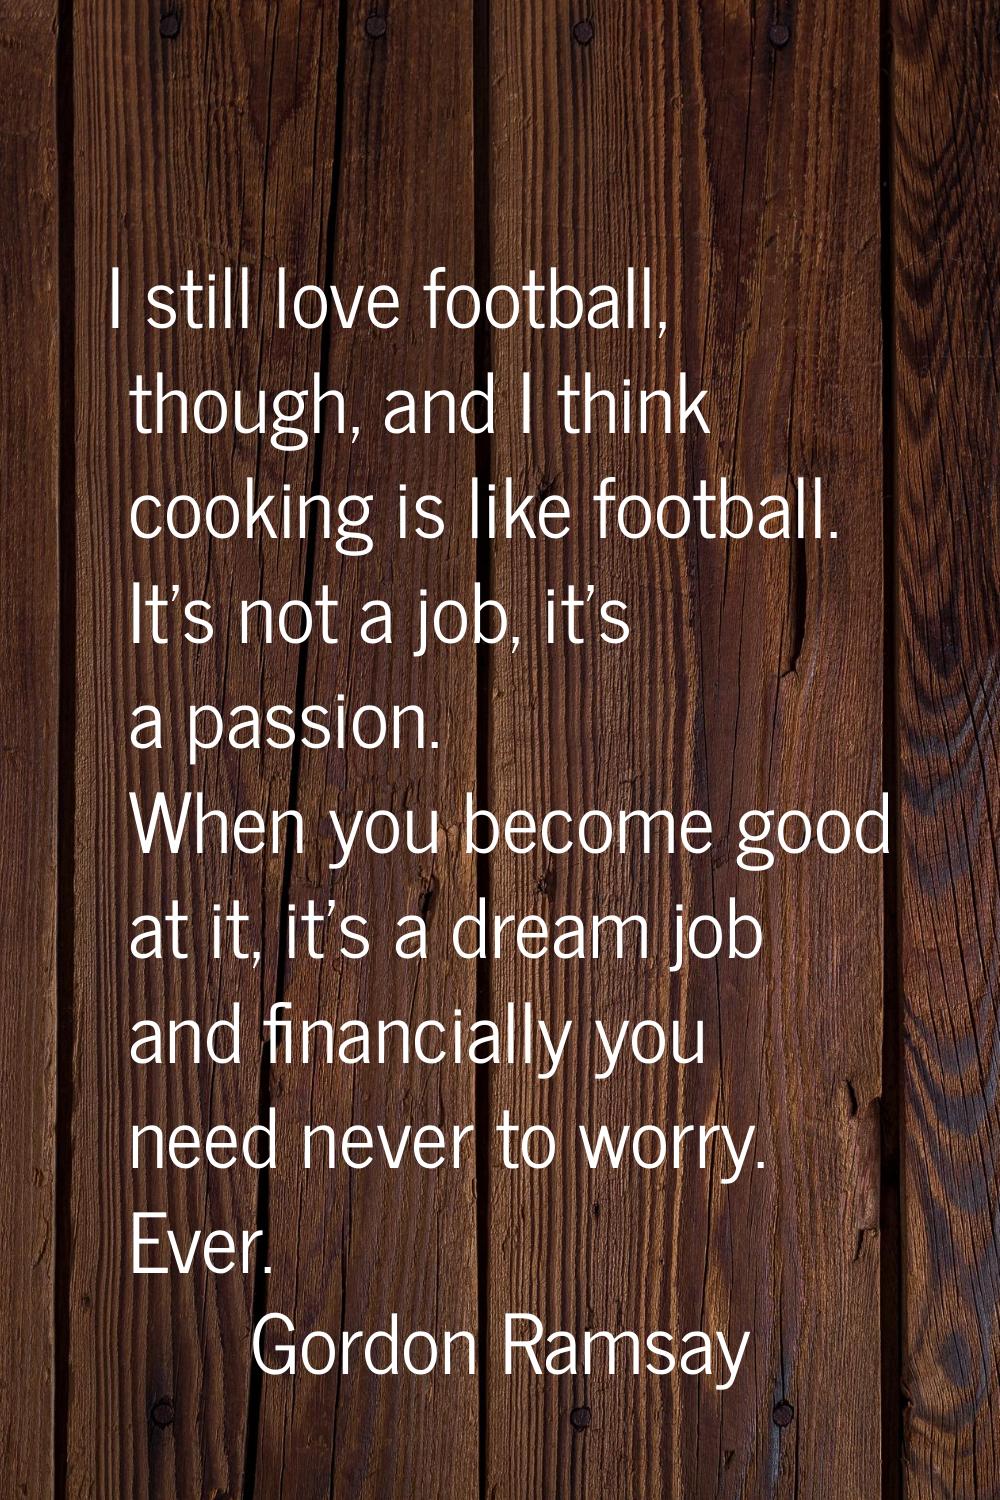 I still love football, though, and I think cooking is like football. It's not a job, it's a passion